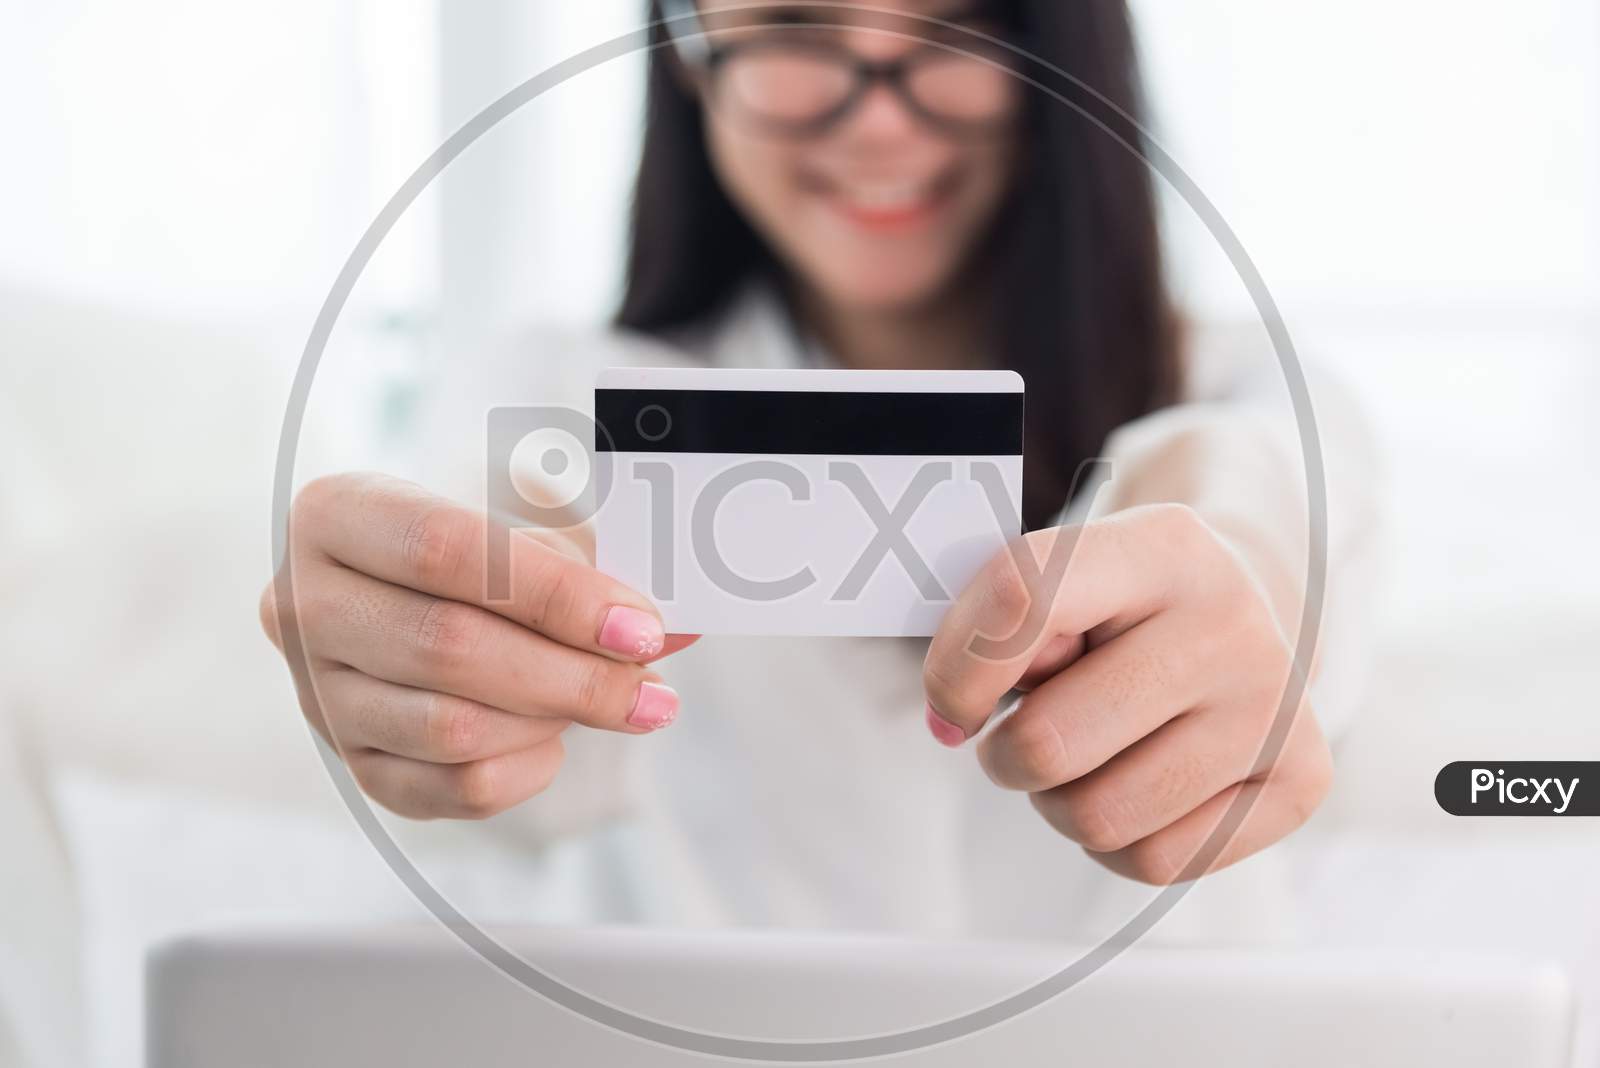 Young Asian Woman Use Credit Card For Online Shopping With Laptop. Business And Banking Payment Concept. Price Sale And Promotion Concept. Technology And Computer Theme. E-Commerce And Marketing Theme